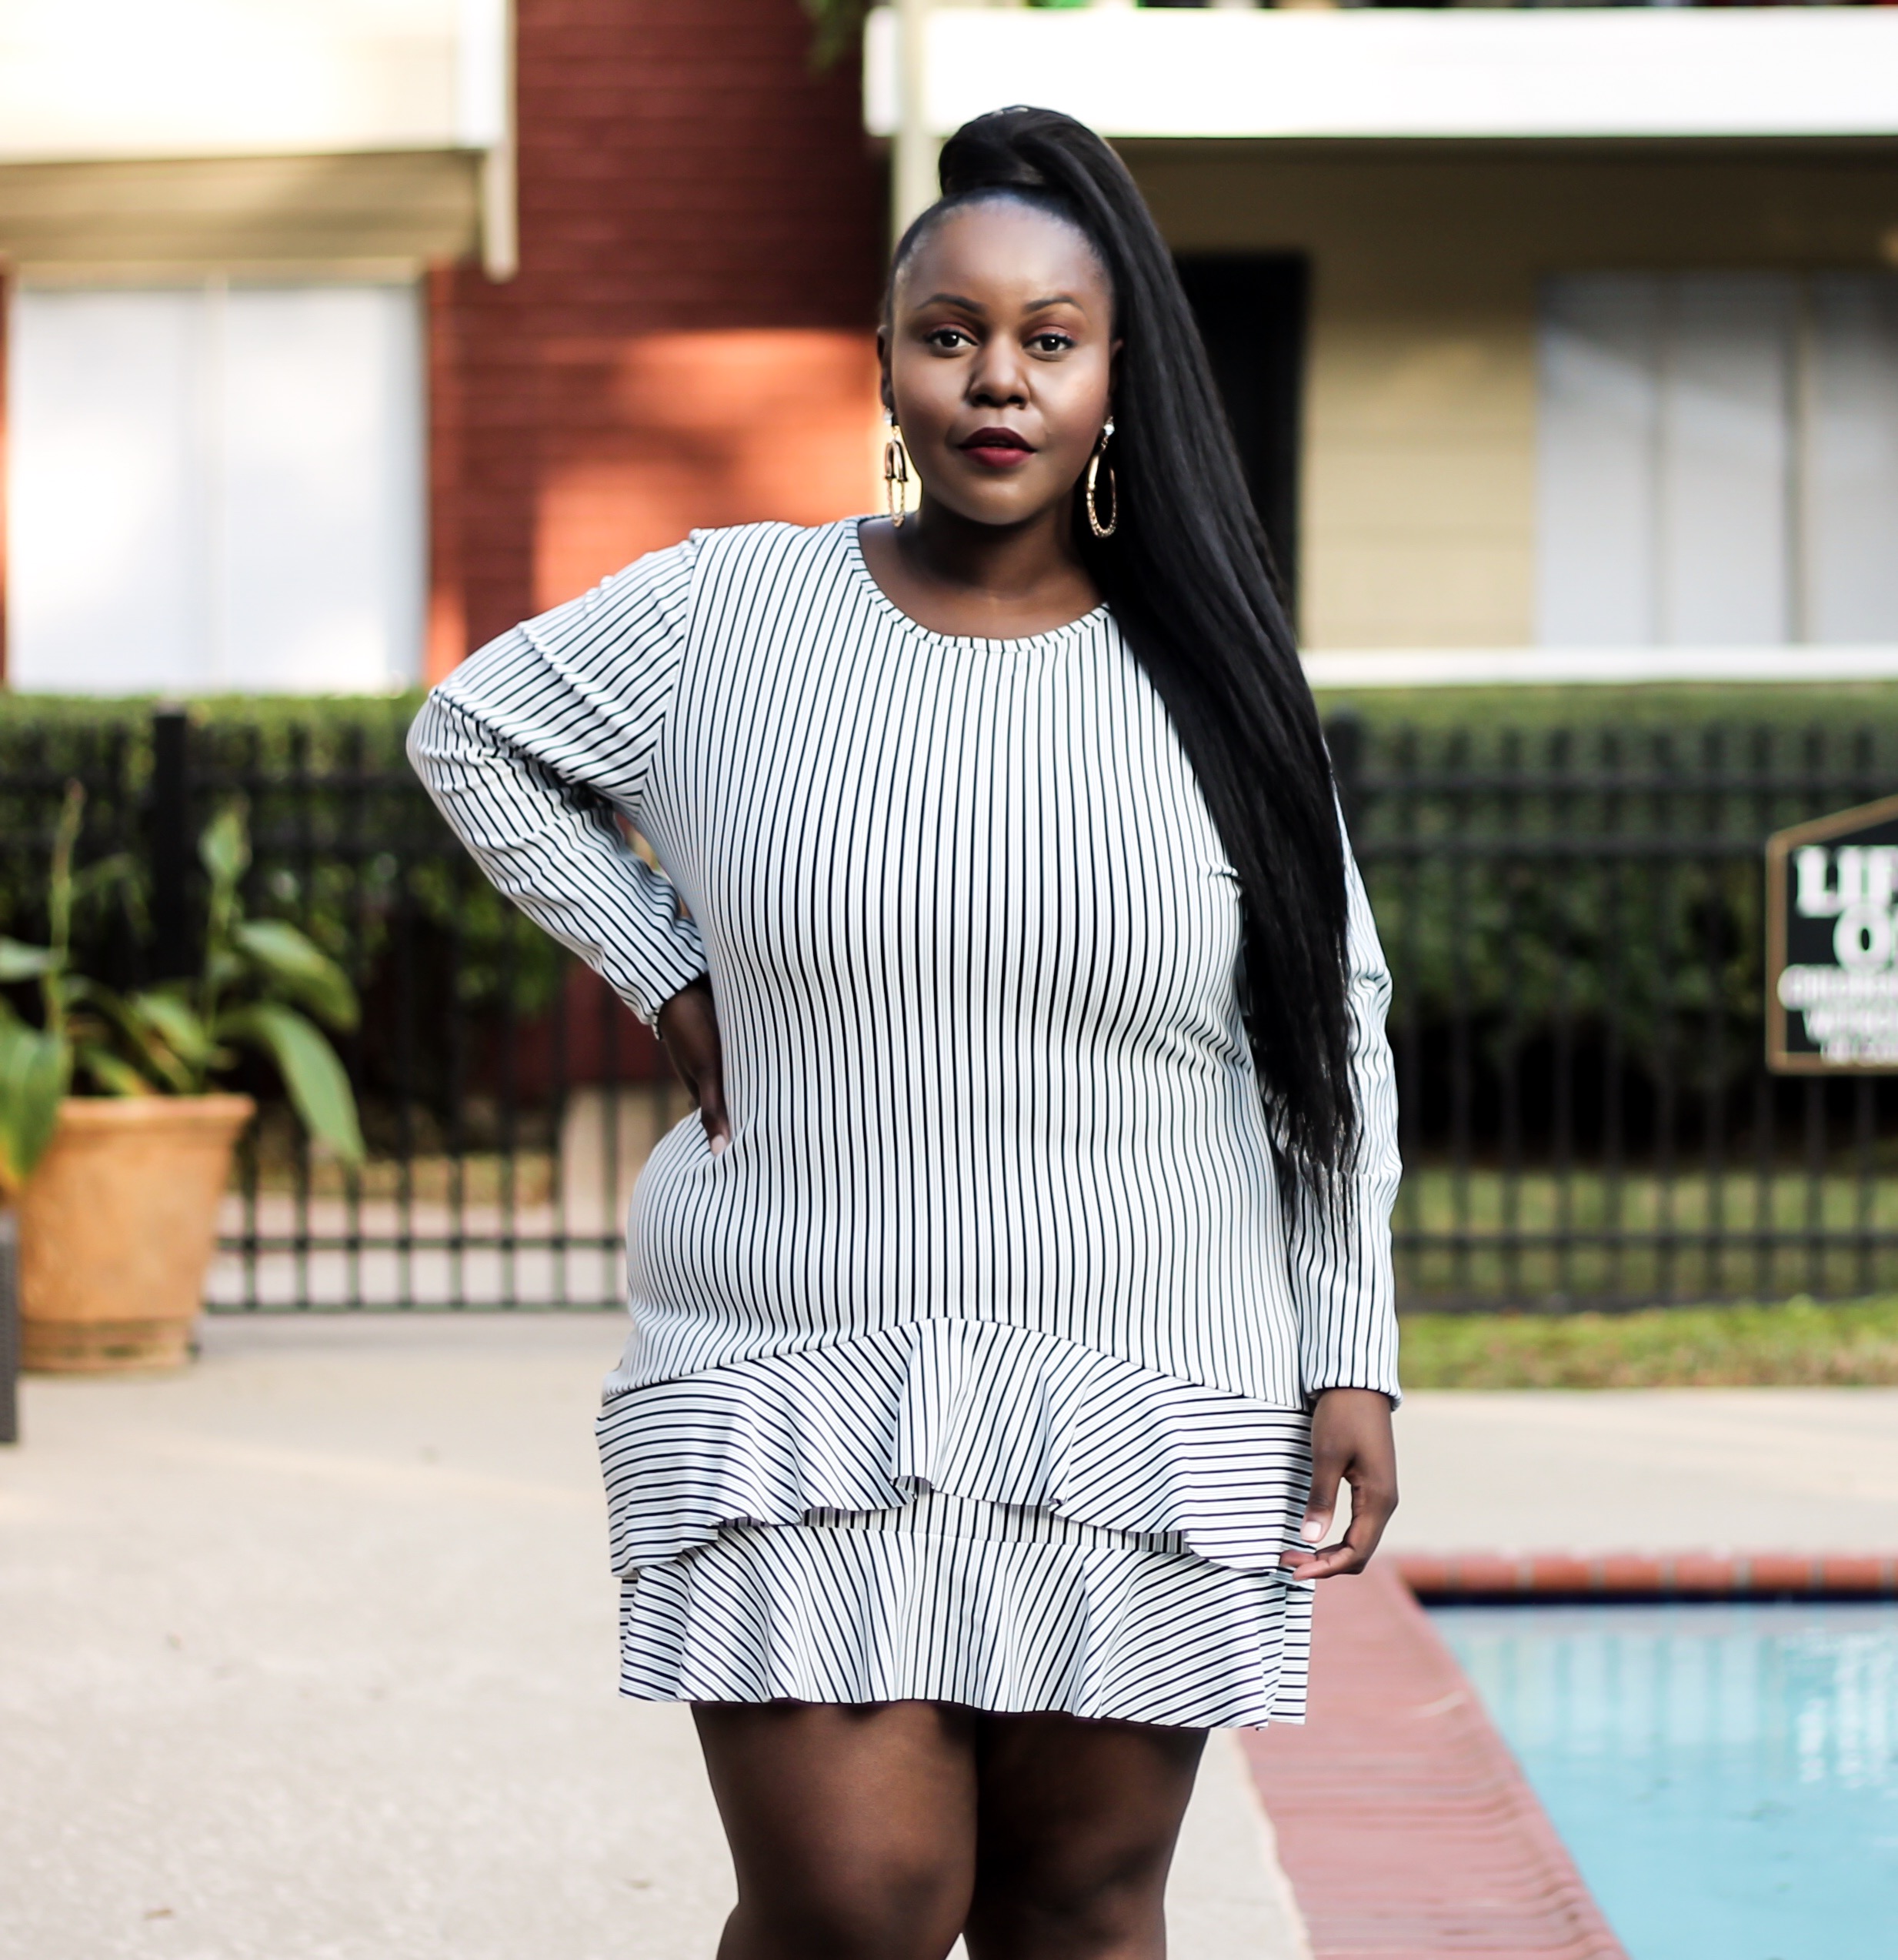 preppy plus size fashion blogs 2017, beautiful curvy girls, how to fill the eye brow of a dark skin, beautiful plus size dark skin girls, plus size black bloggers, clothes for curvy girls, curvy girl fashion clothing, plus blog, plus size fashion tips, plus size women blog, curvy women fashion, plus blog, curvy girl fashion blog, style plus curves, plus size fashion instagram, curvy girl blog, bbw blog, plus size street fashion, plus size beauty blog, plus size fashion ideas, curvy girl summer outfits, plus size fashion magazine, plus fashion bloggers, zara, Rosie the riveter shirt; Emilia embroidered beaded clutch; Vince Camuto heels; Lula shell drop earrings; Aldo Galigossi sunnies, GABRIELLE UNION COLLECTION - STRIPED KIMONO DRESS, new york & company,